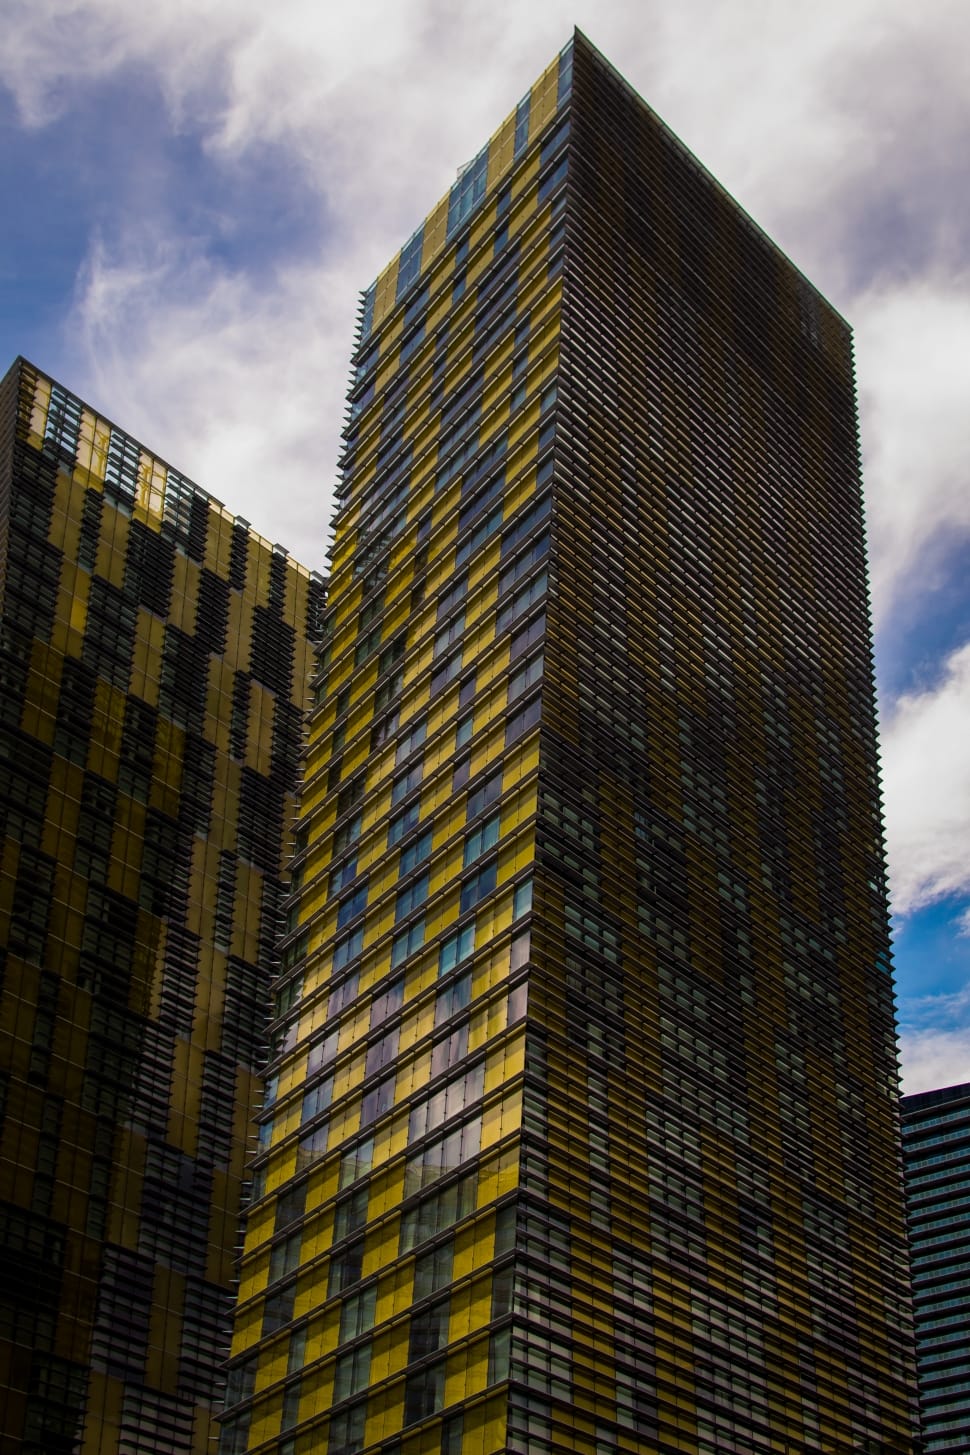 low angle photography of yellow and blue glass curtain high rise buildings at daytime preview